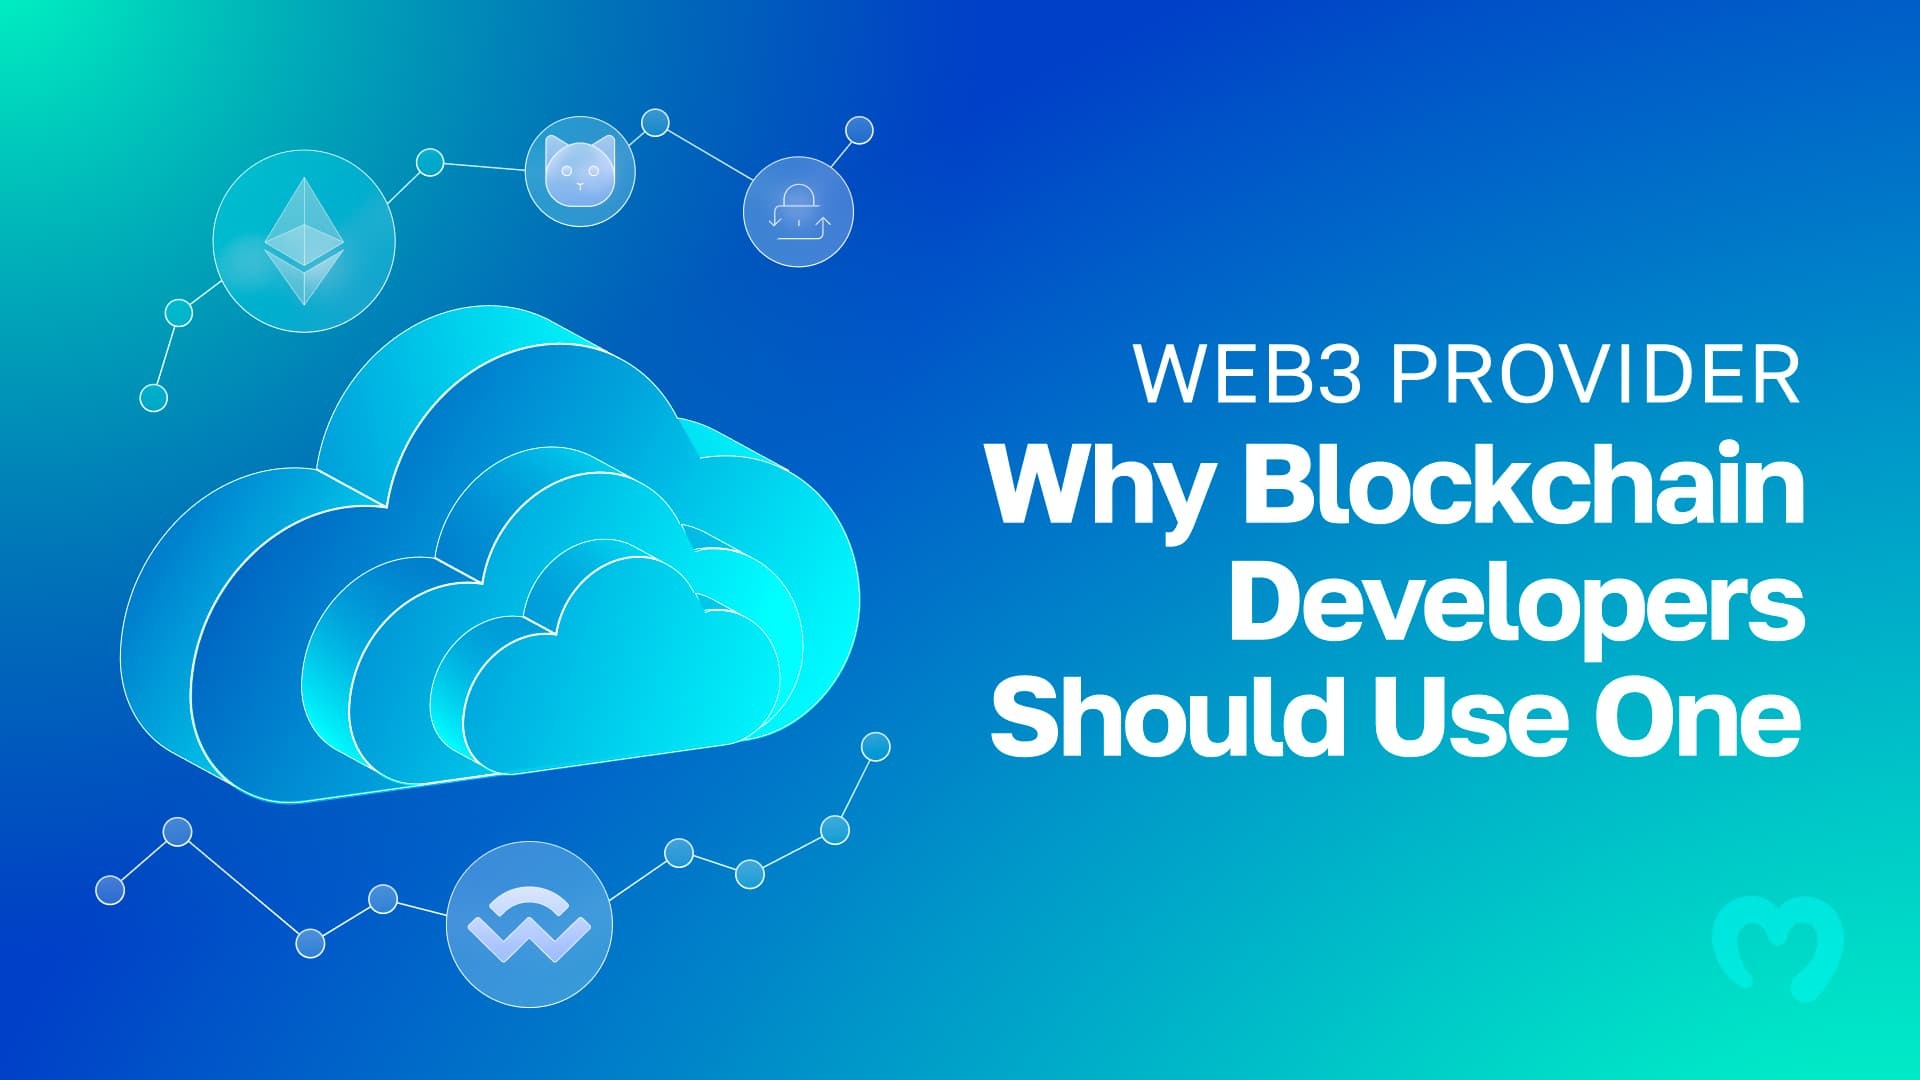 Various elements such as the Ethereum blockchain, a crypto wallet, nodes, etc., and a text that says "Web3 providers - Why Blockchain Developers Should Use One".